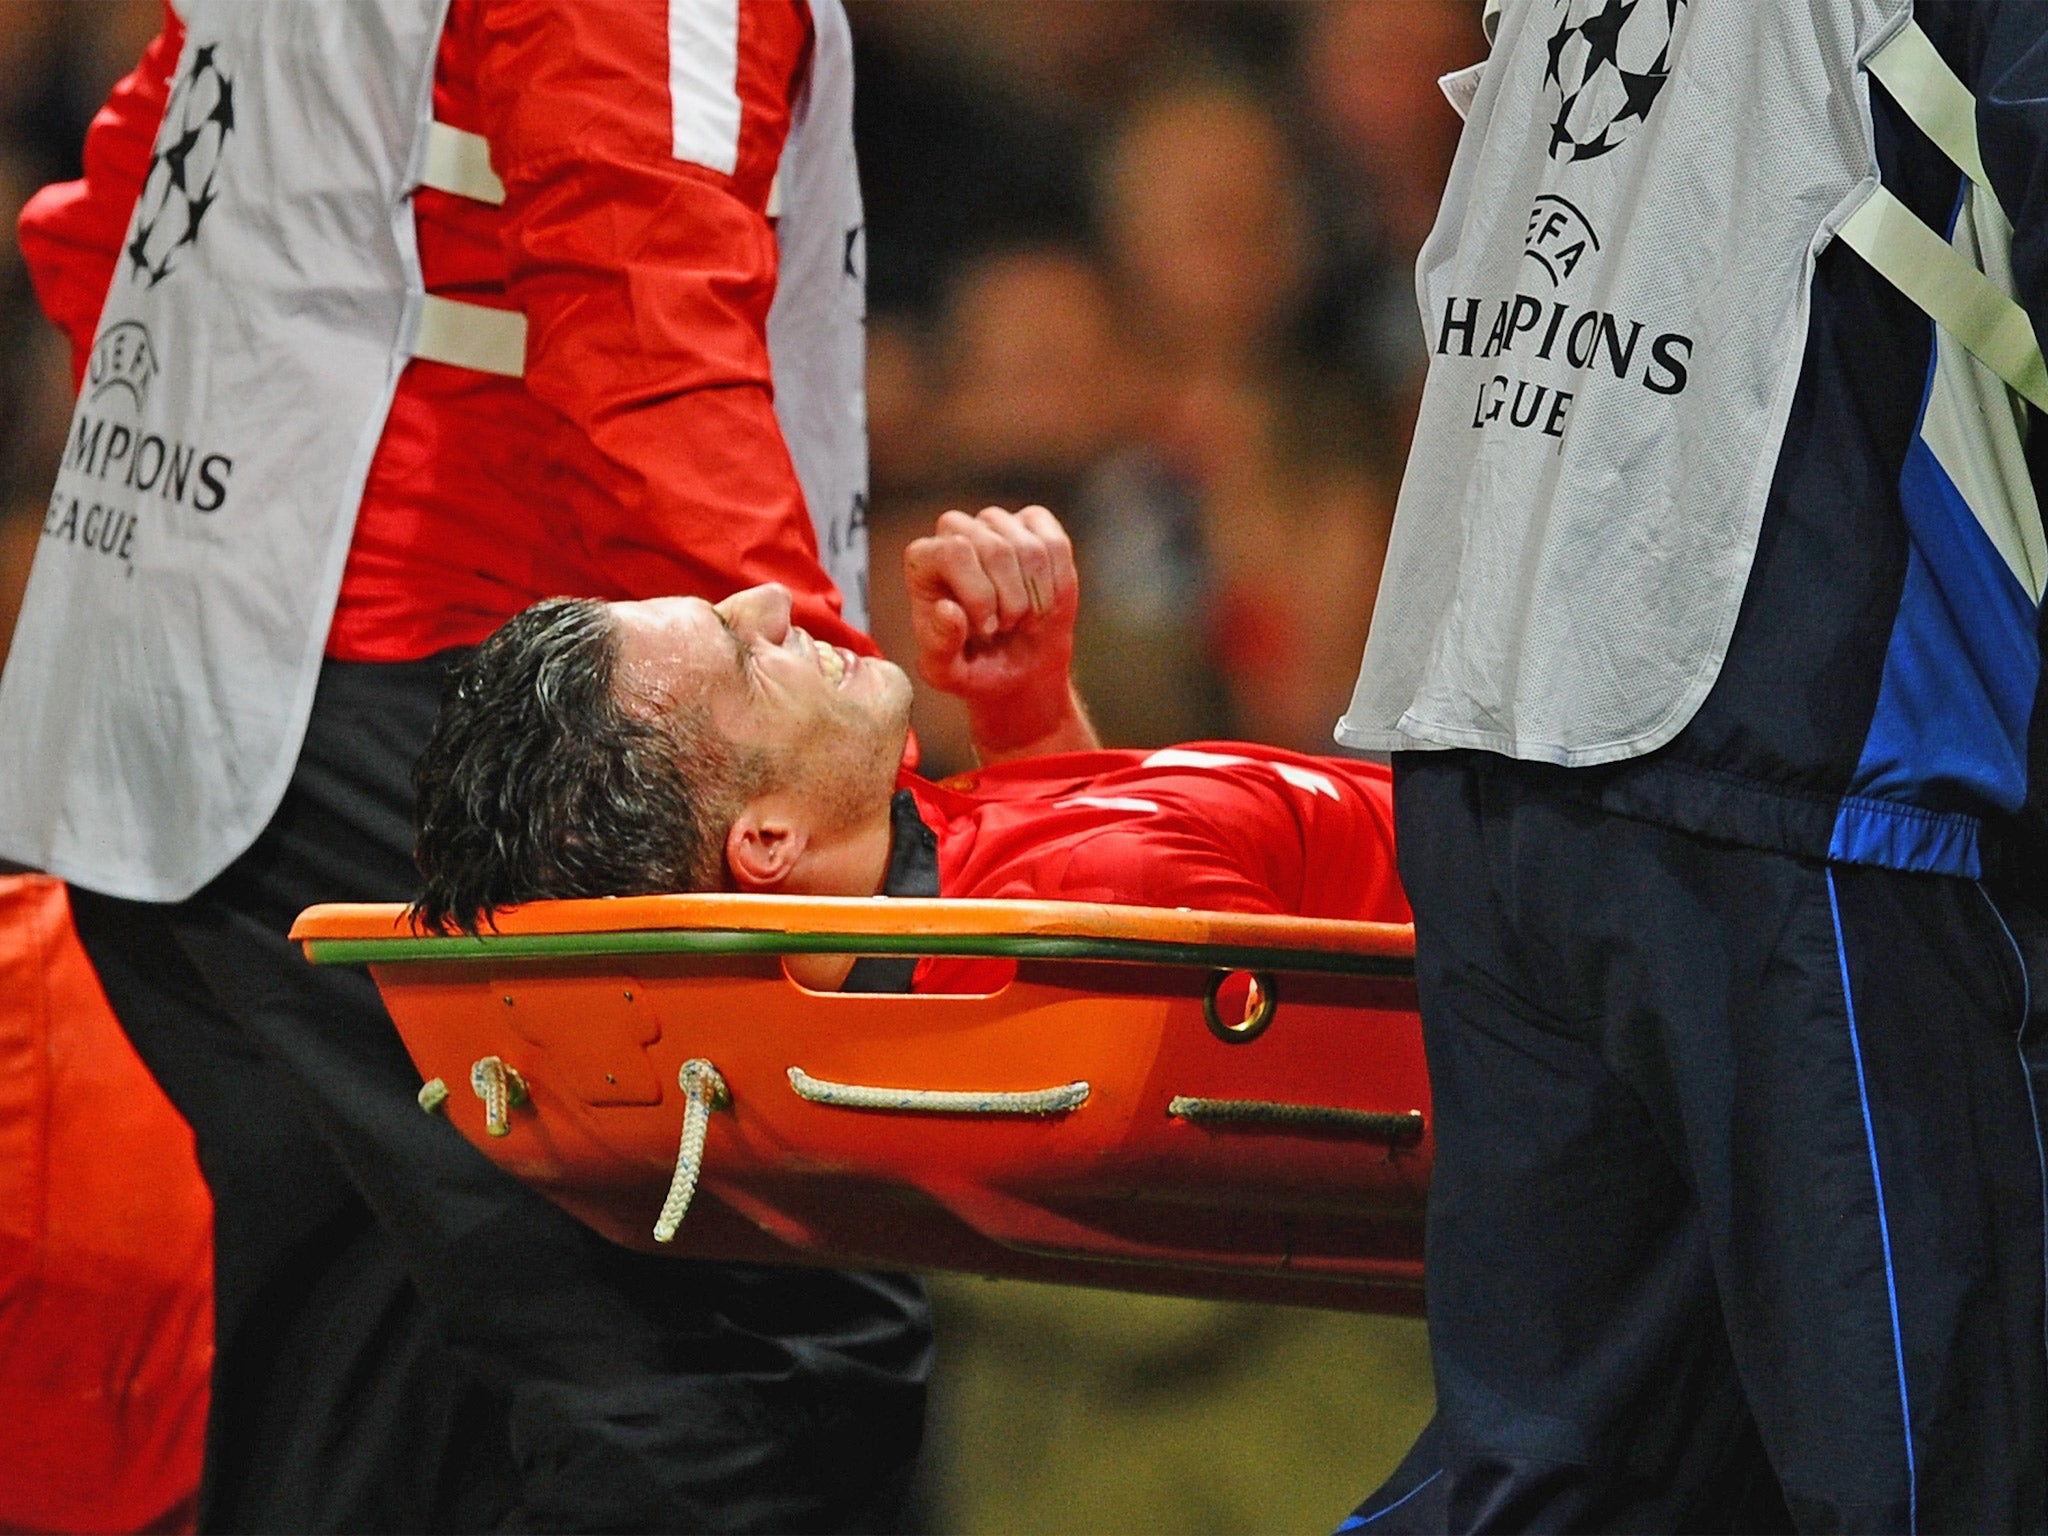 Hat-trick hero van Persie's night ended disappointingly as he exited the game on a stretcher